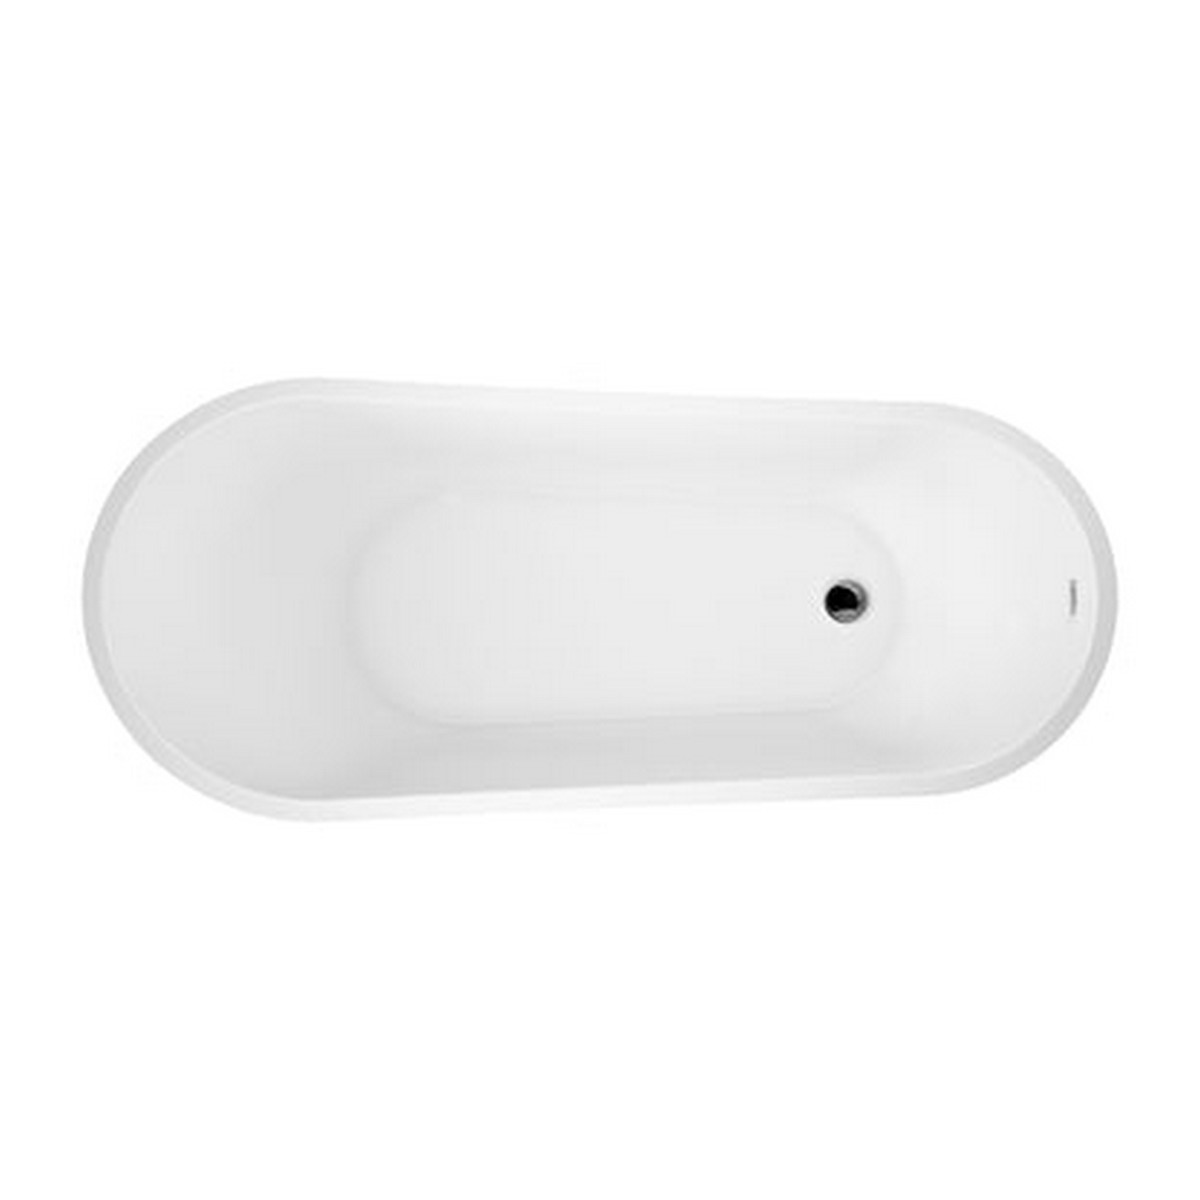 BARCLAY ATFSN67SIG MALINDA 65 1/4 INCH ACRYLIC FREESTANDING OVAL SOAKING SLIPPER BATHTUB IN WHITE WITH INTEGRAL DRAIN AND OVERFLOW